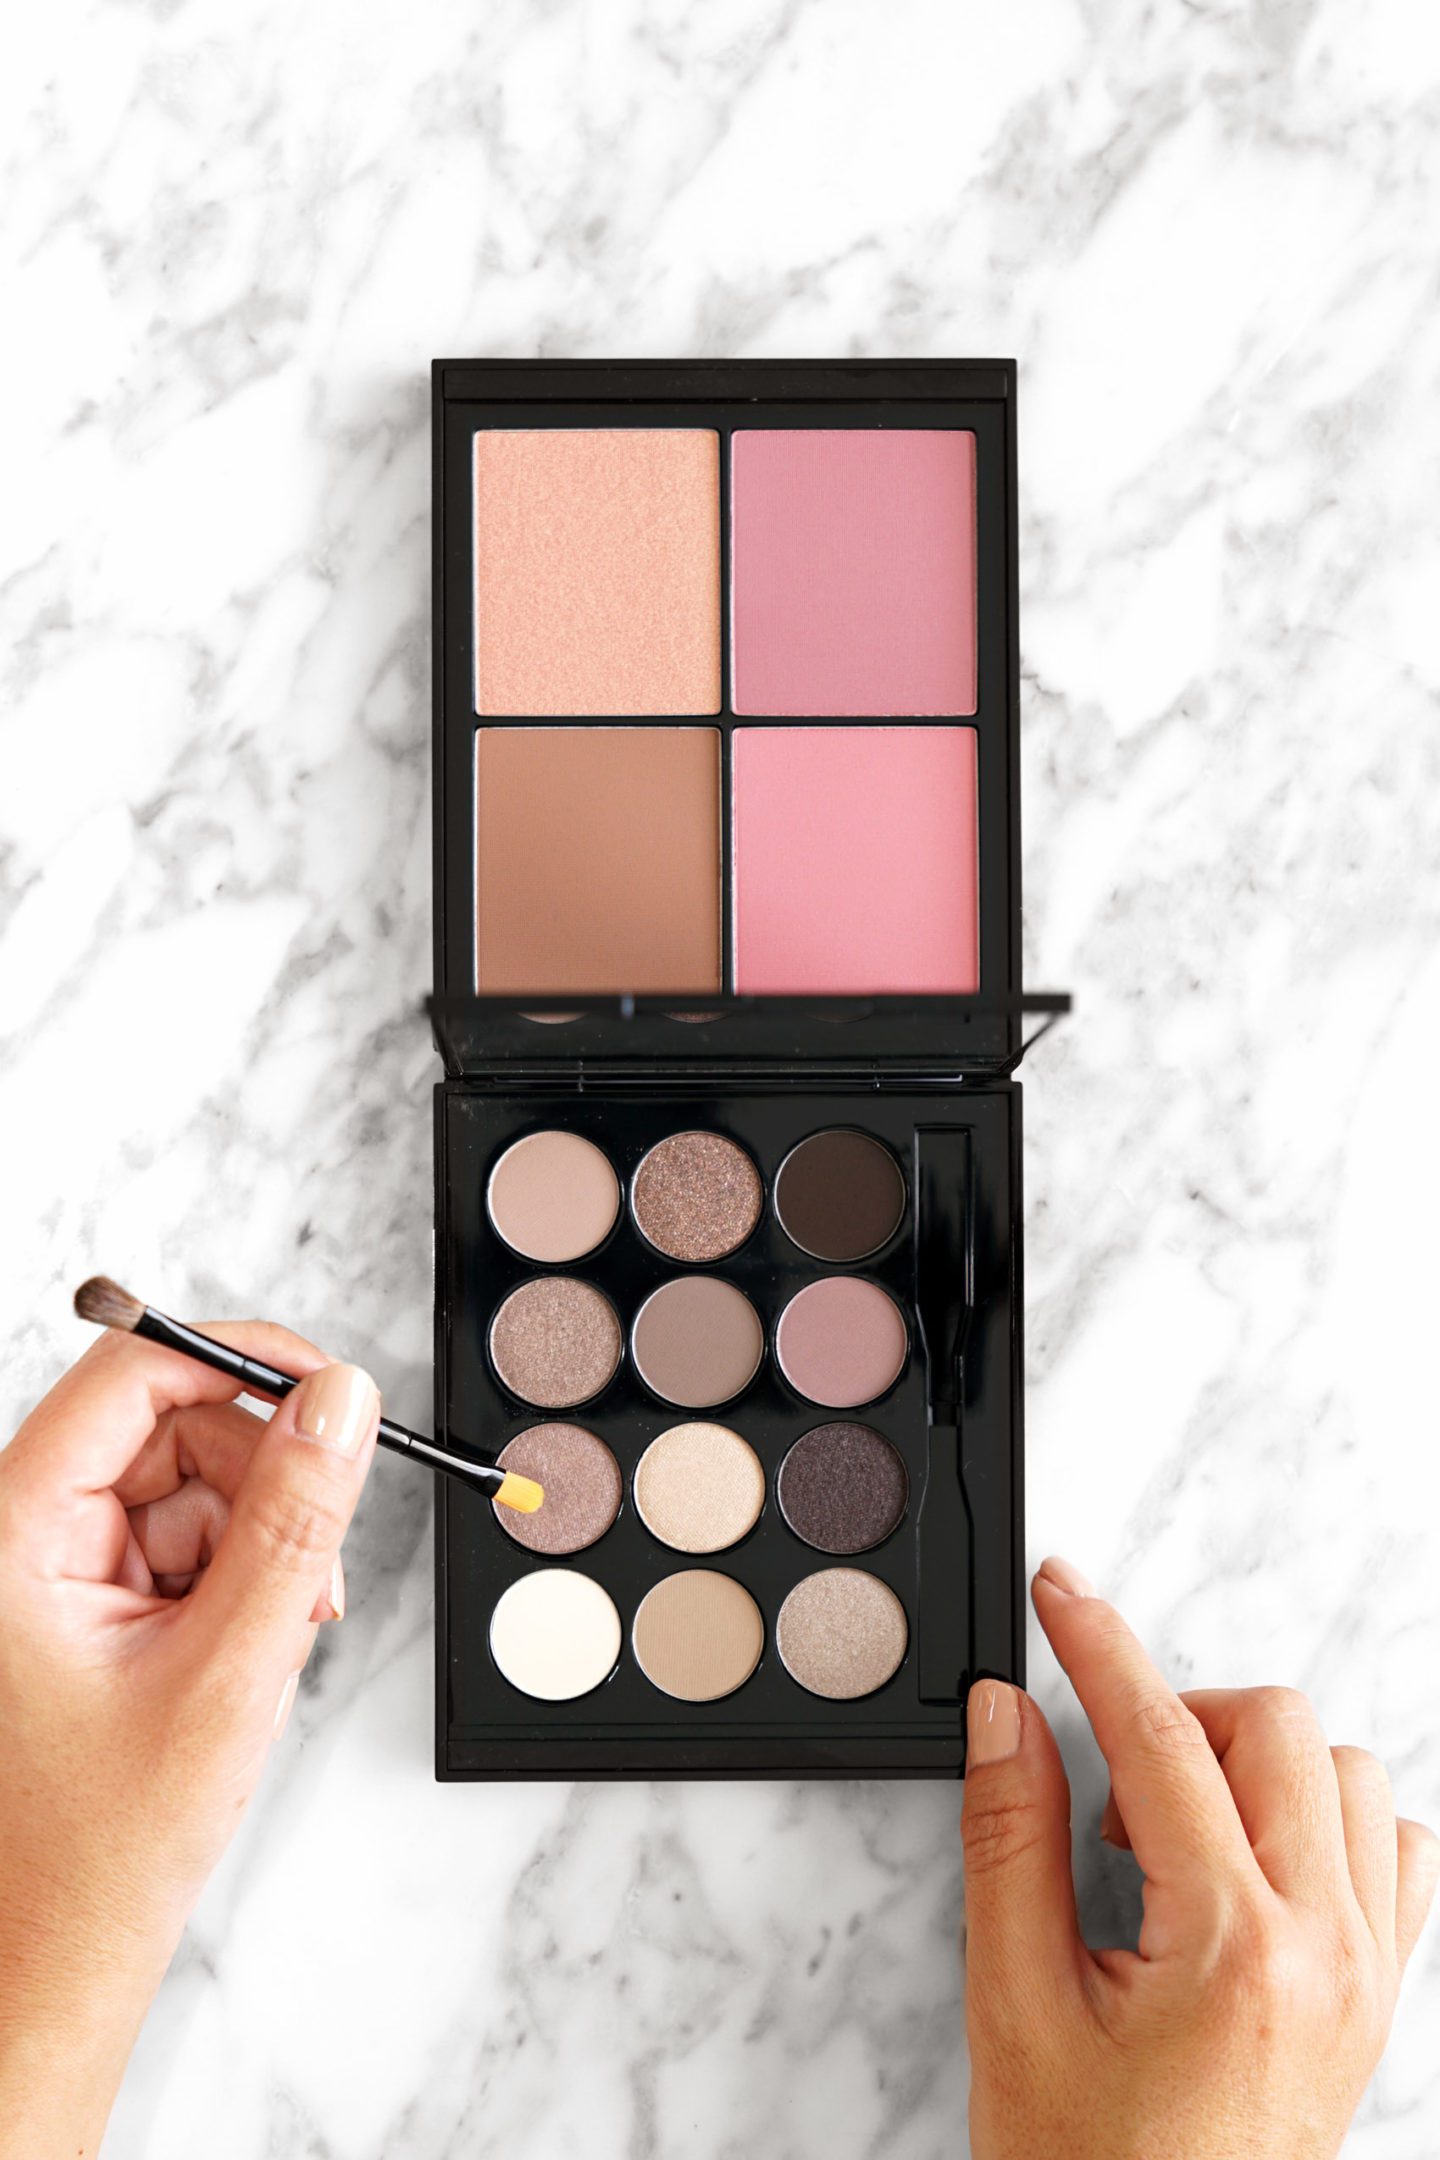 Bobbi Brown x Nordstrom Sale Deluxe Eye and Cheek Set Review